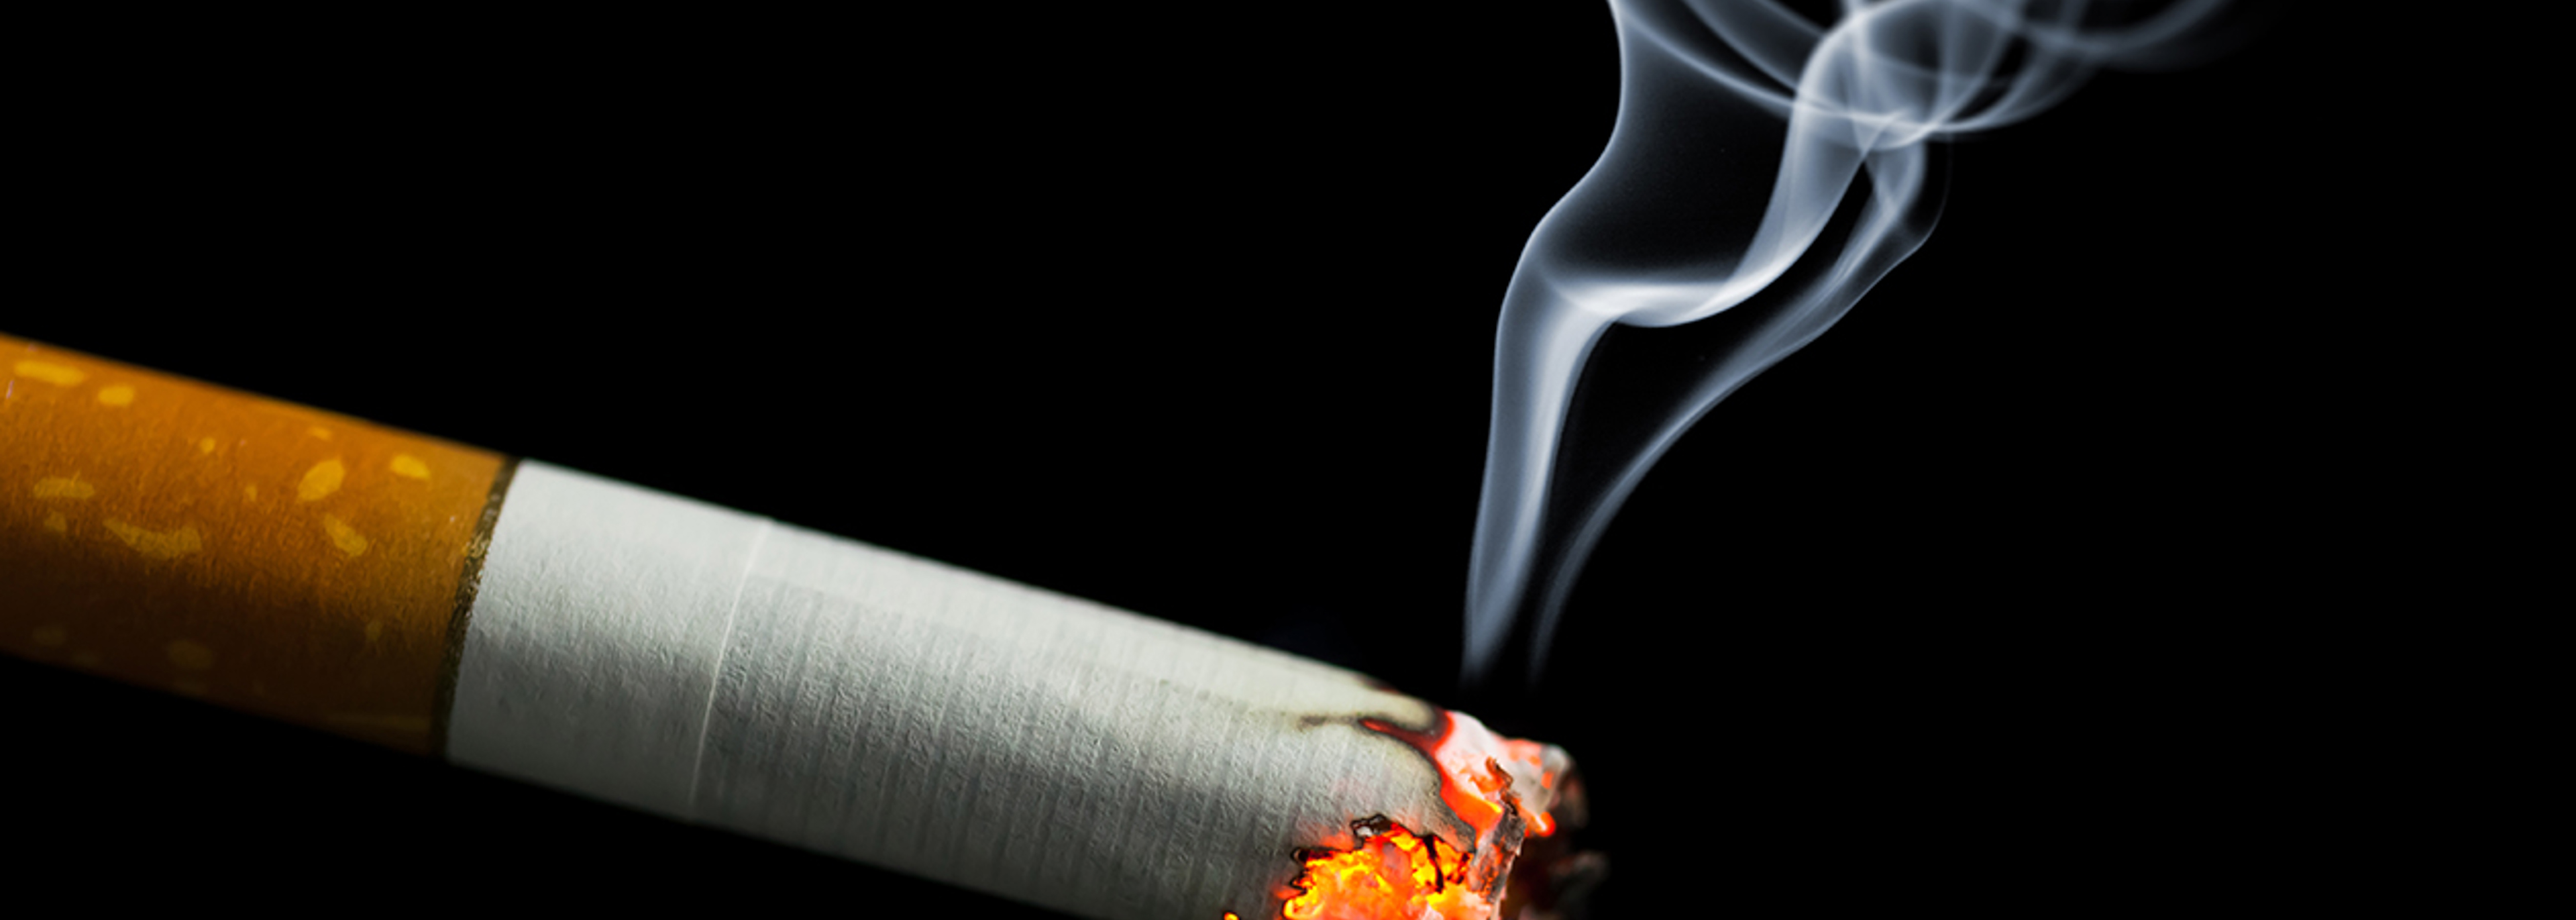 Reverse public health cuts to bring back council stop-smoking services, say campaigners